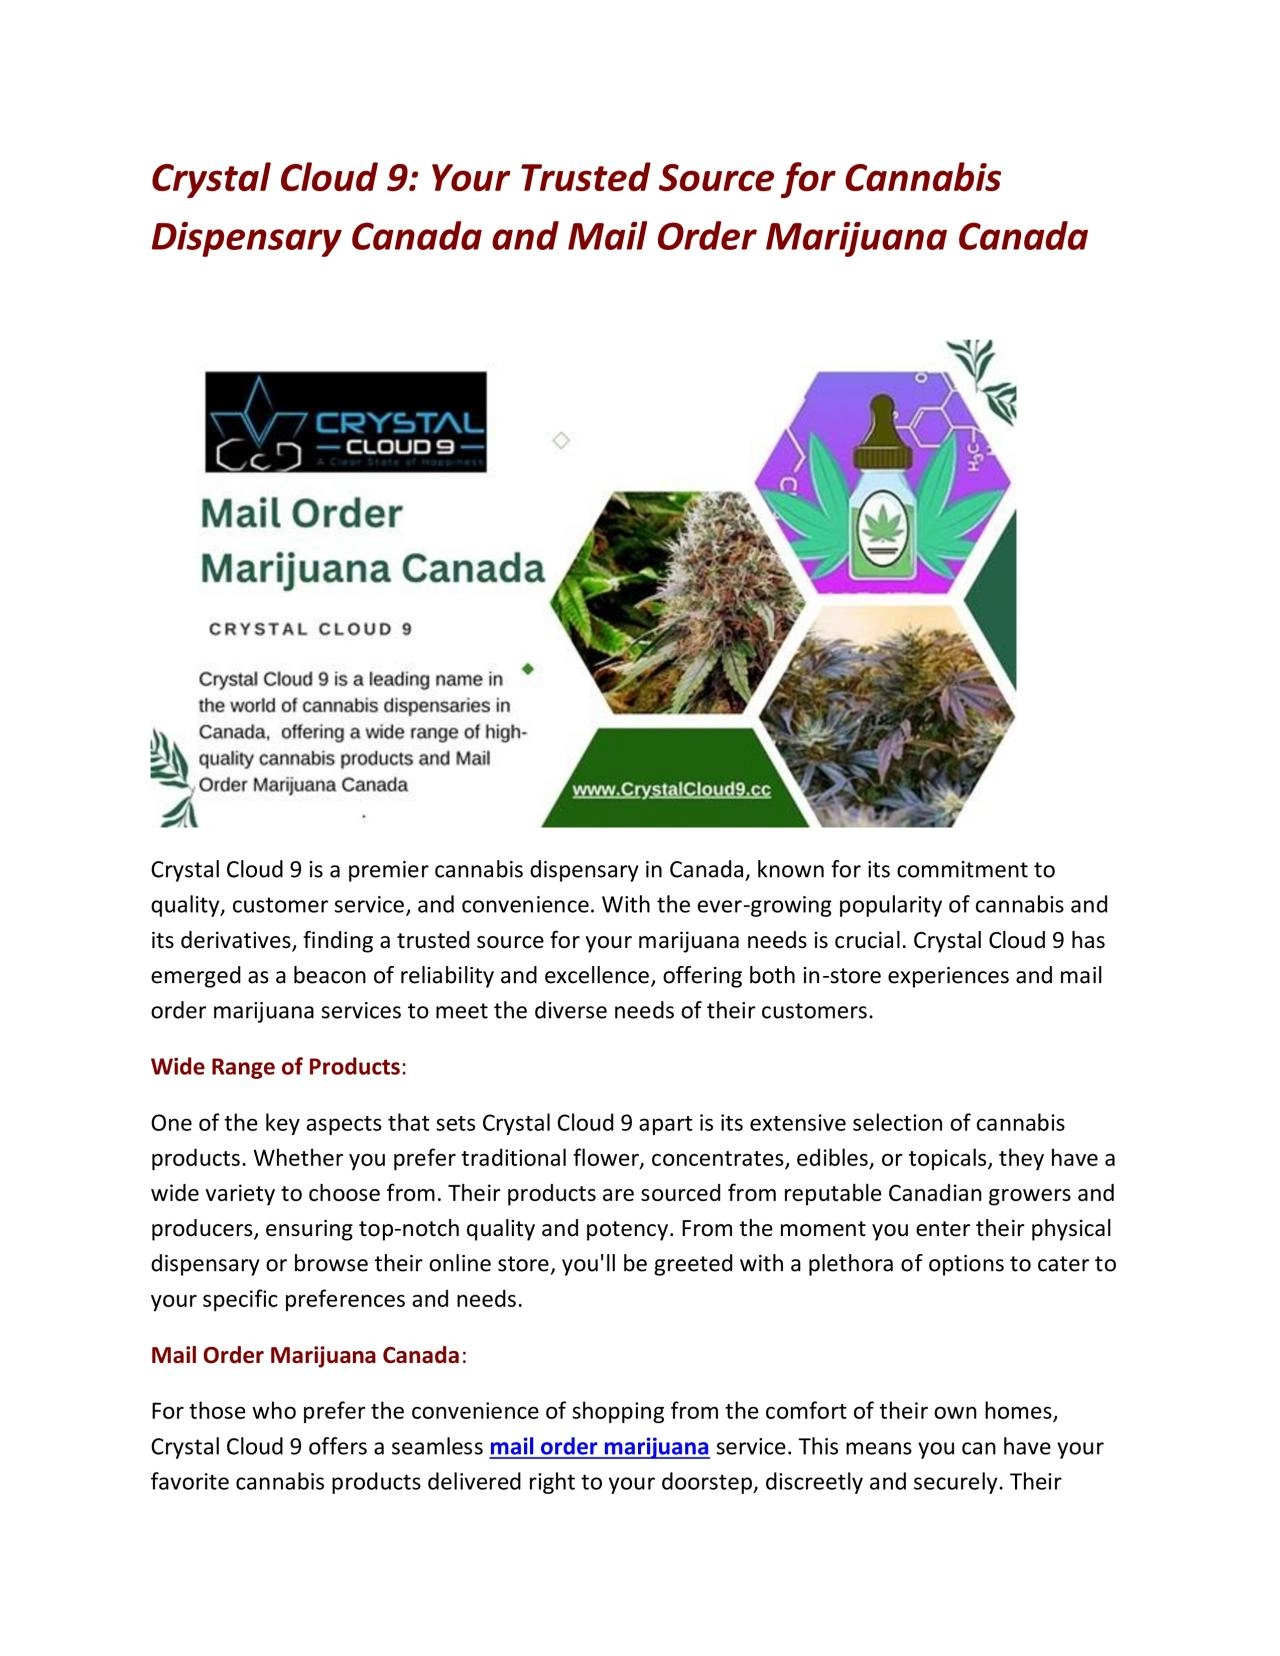 Crystal Cloud 9: Your Trusted Source for Cannabis Dispensary Canada and Mail Order Marijuana